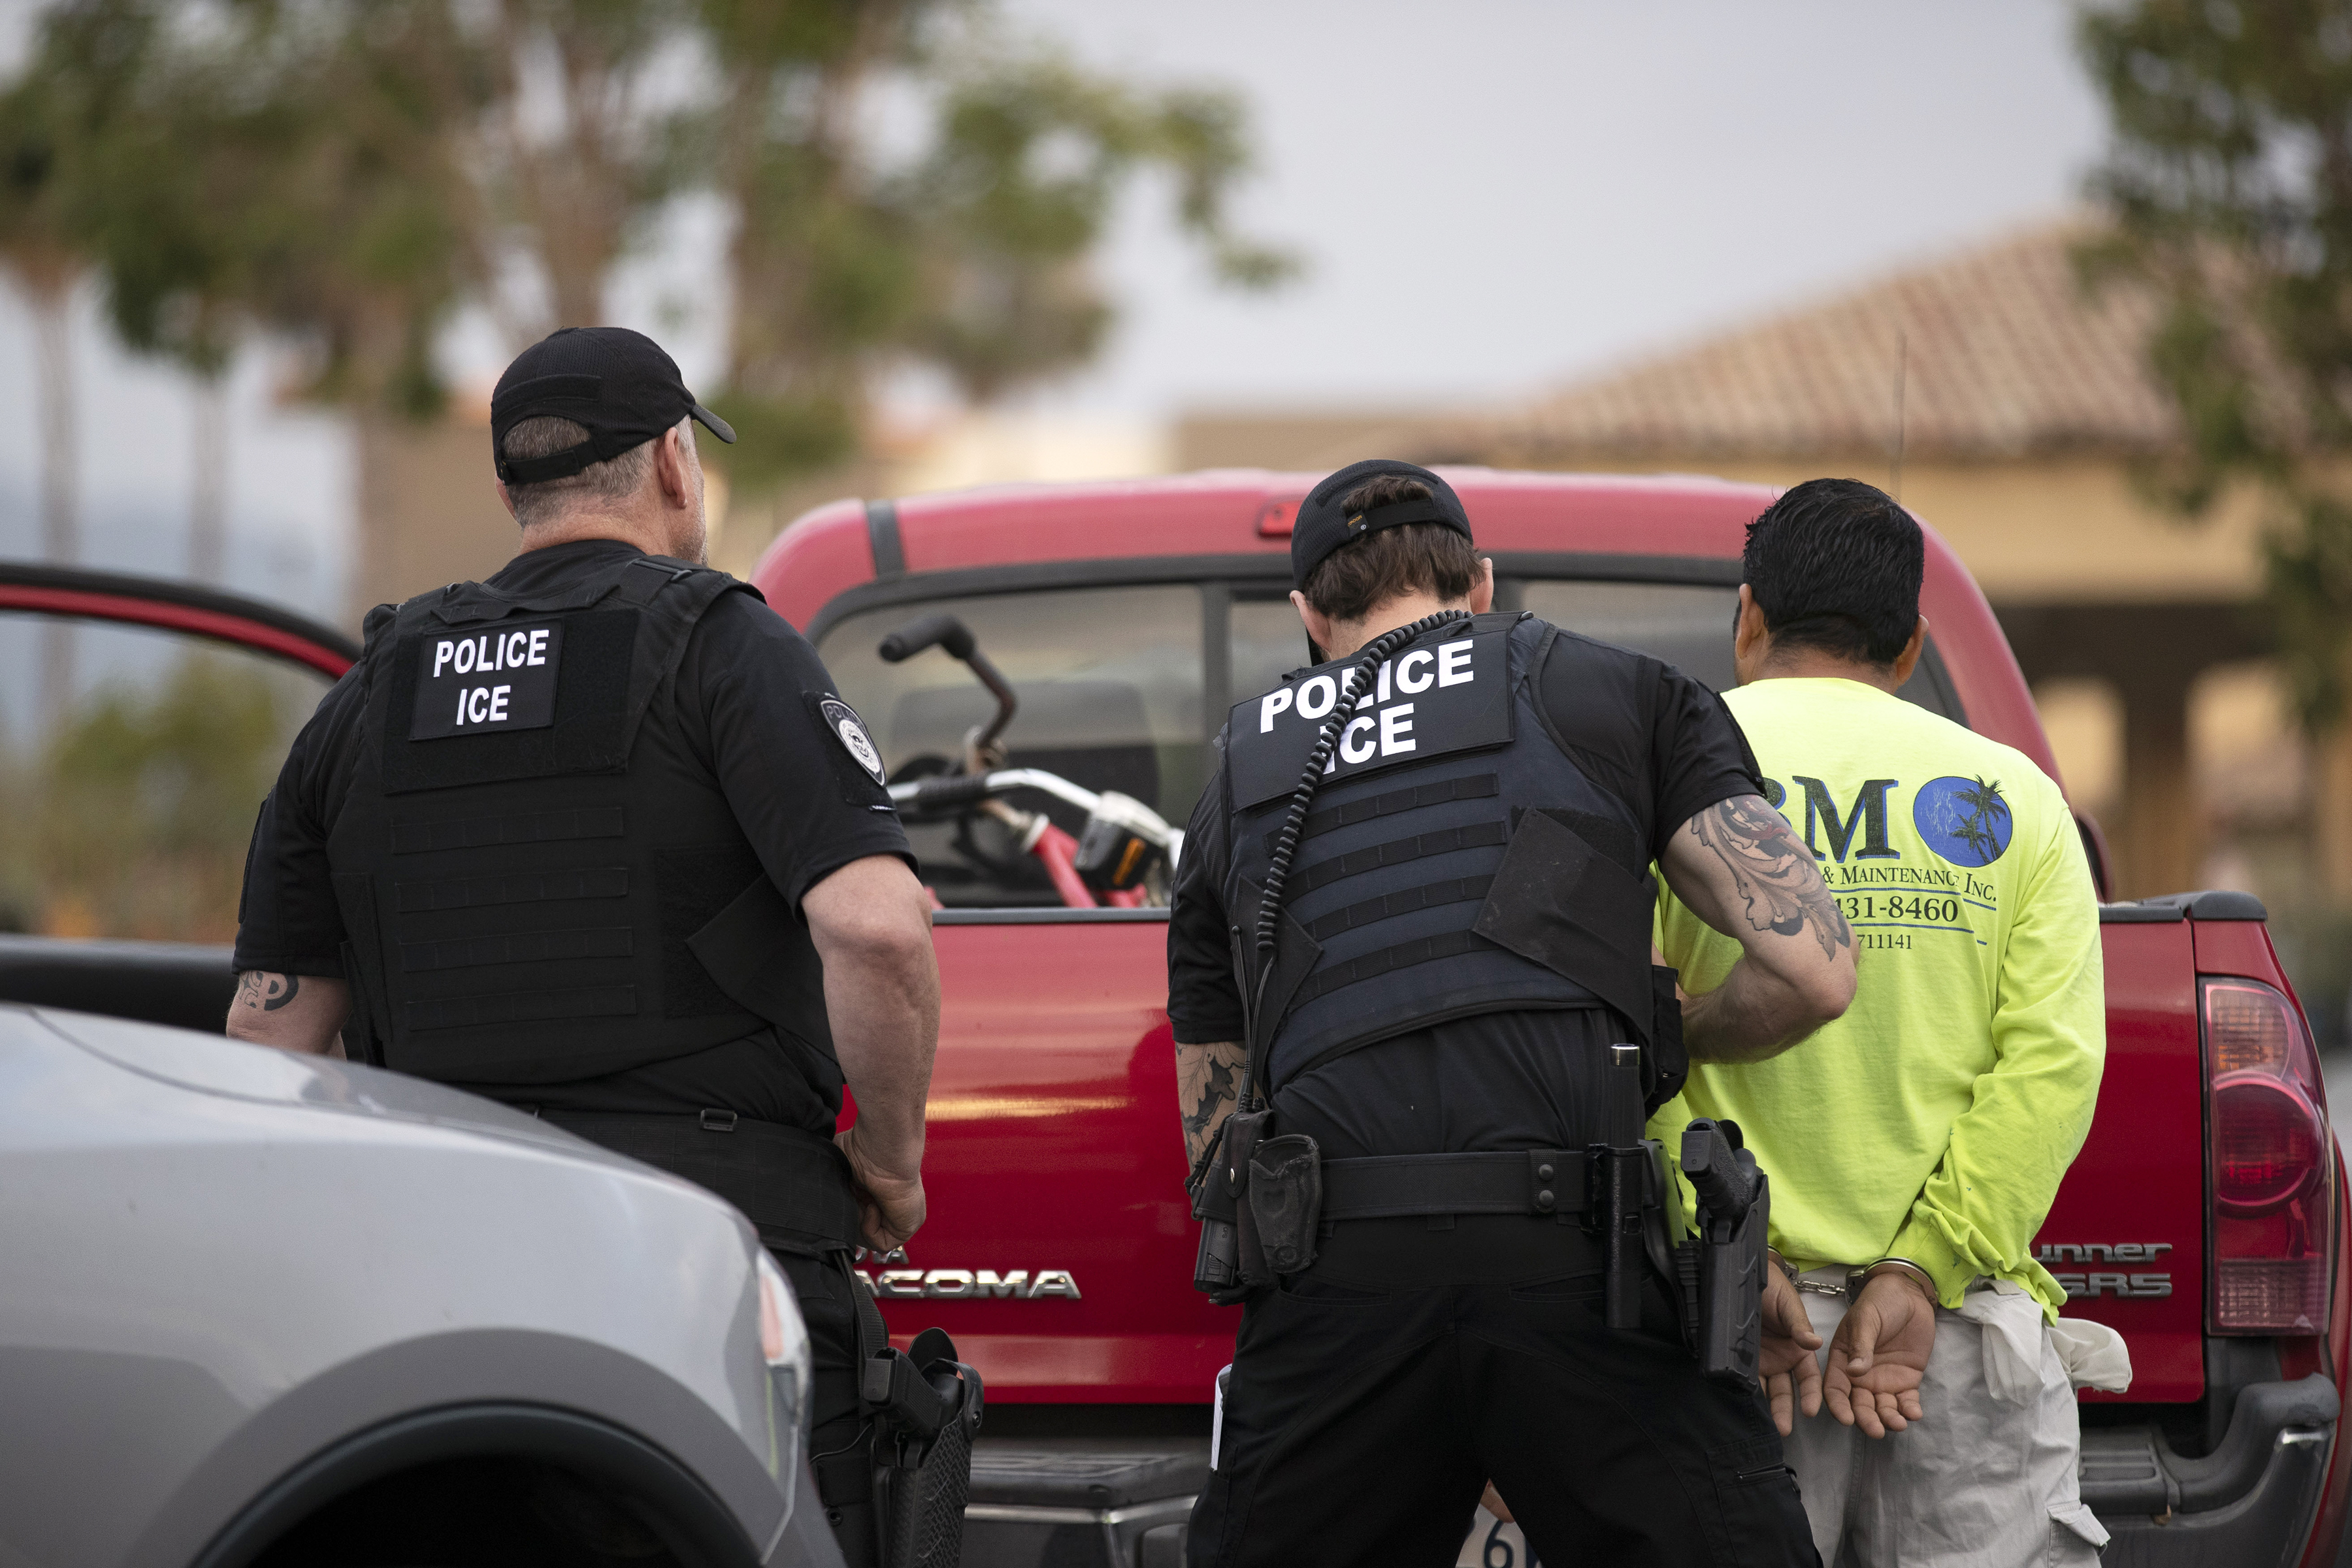 Two immigration officers escort a person in handcuffs past a red pickup truck.